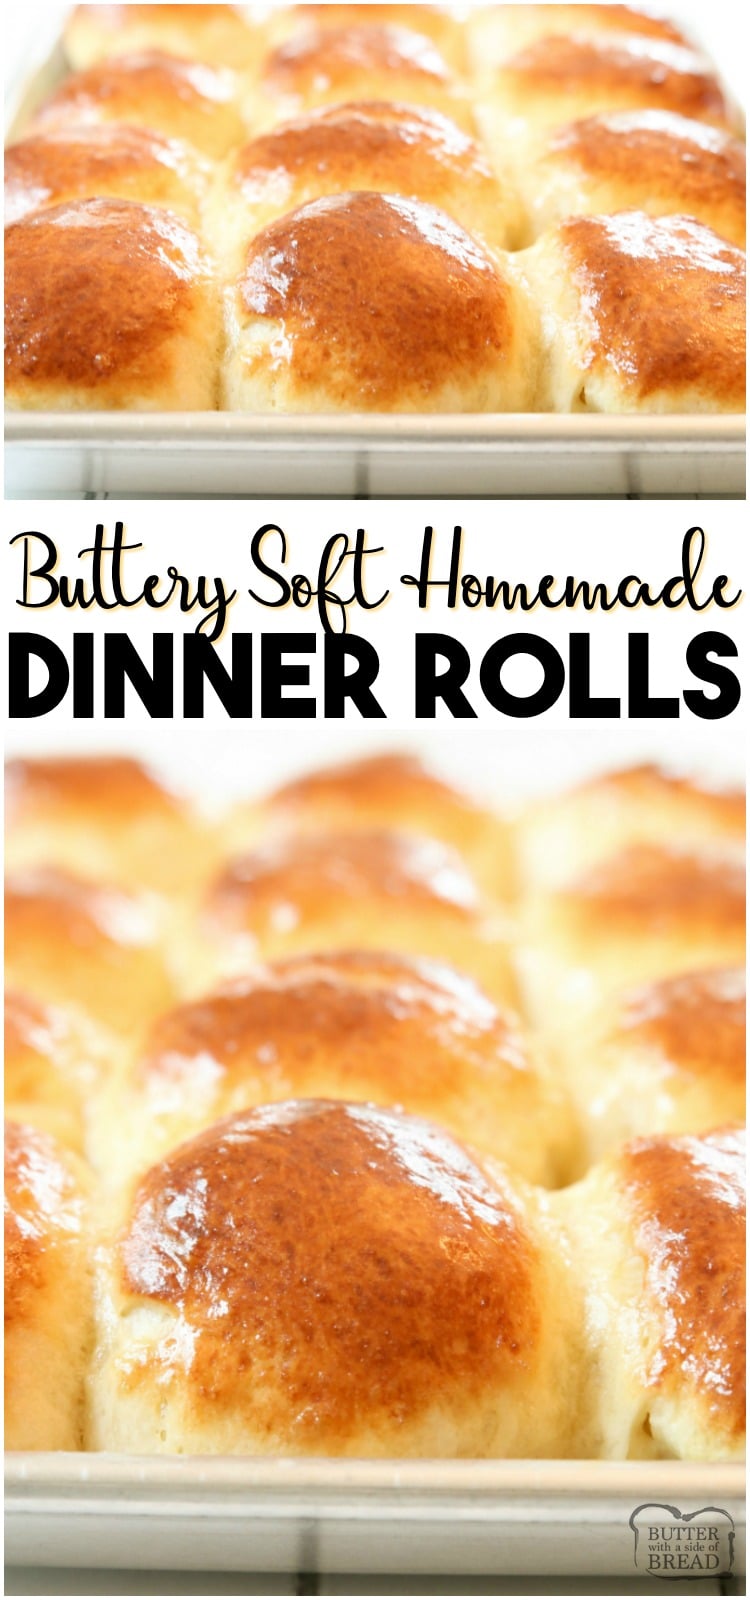 Easy Dinner Roll recipe perfect for procrastinators! Done in just over an hour, these buttery soft dinner rolls are the perfect addition to dinner.